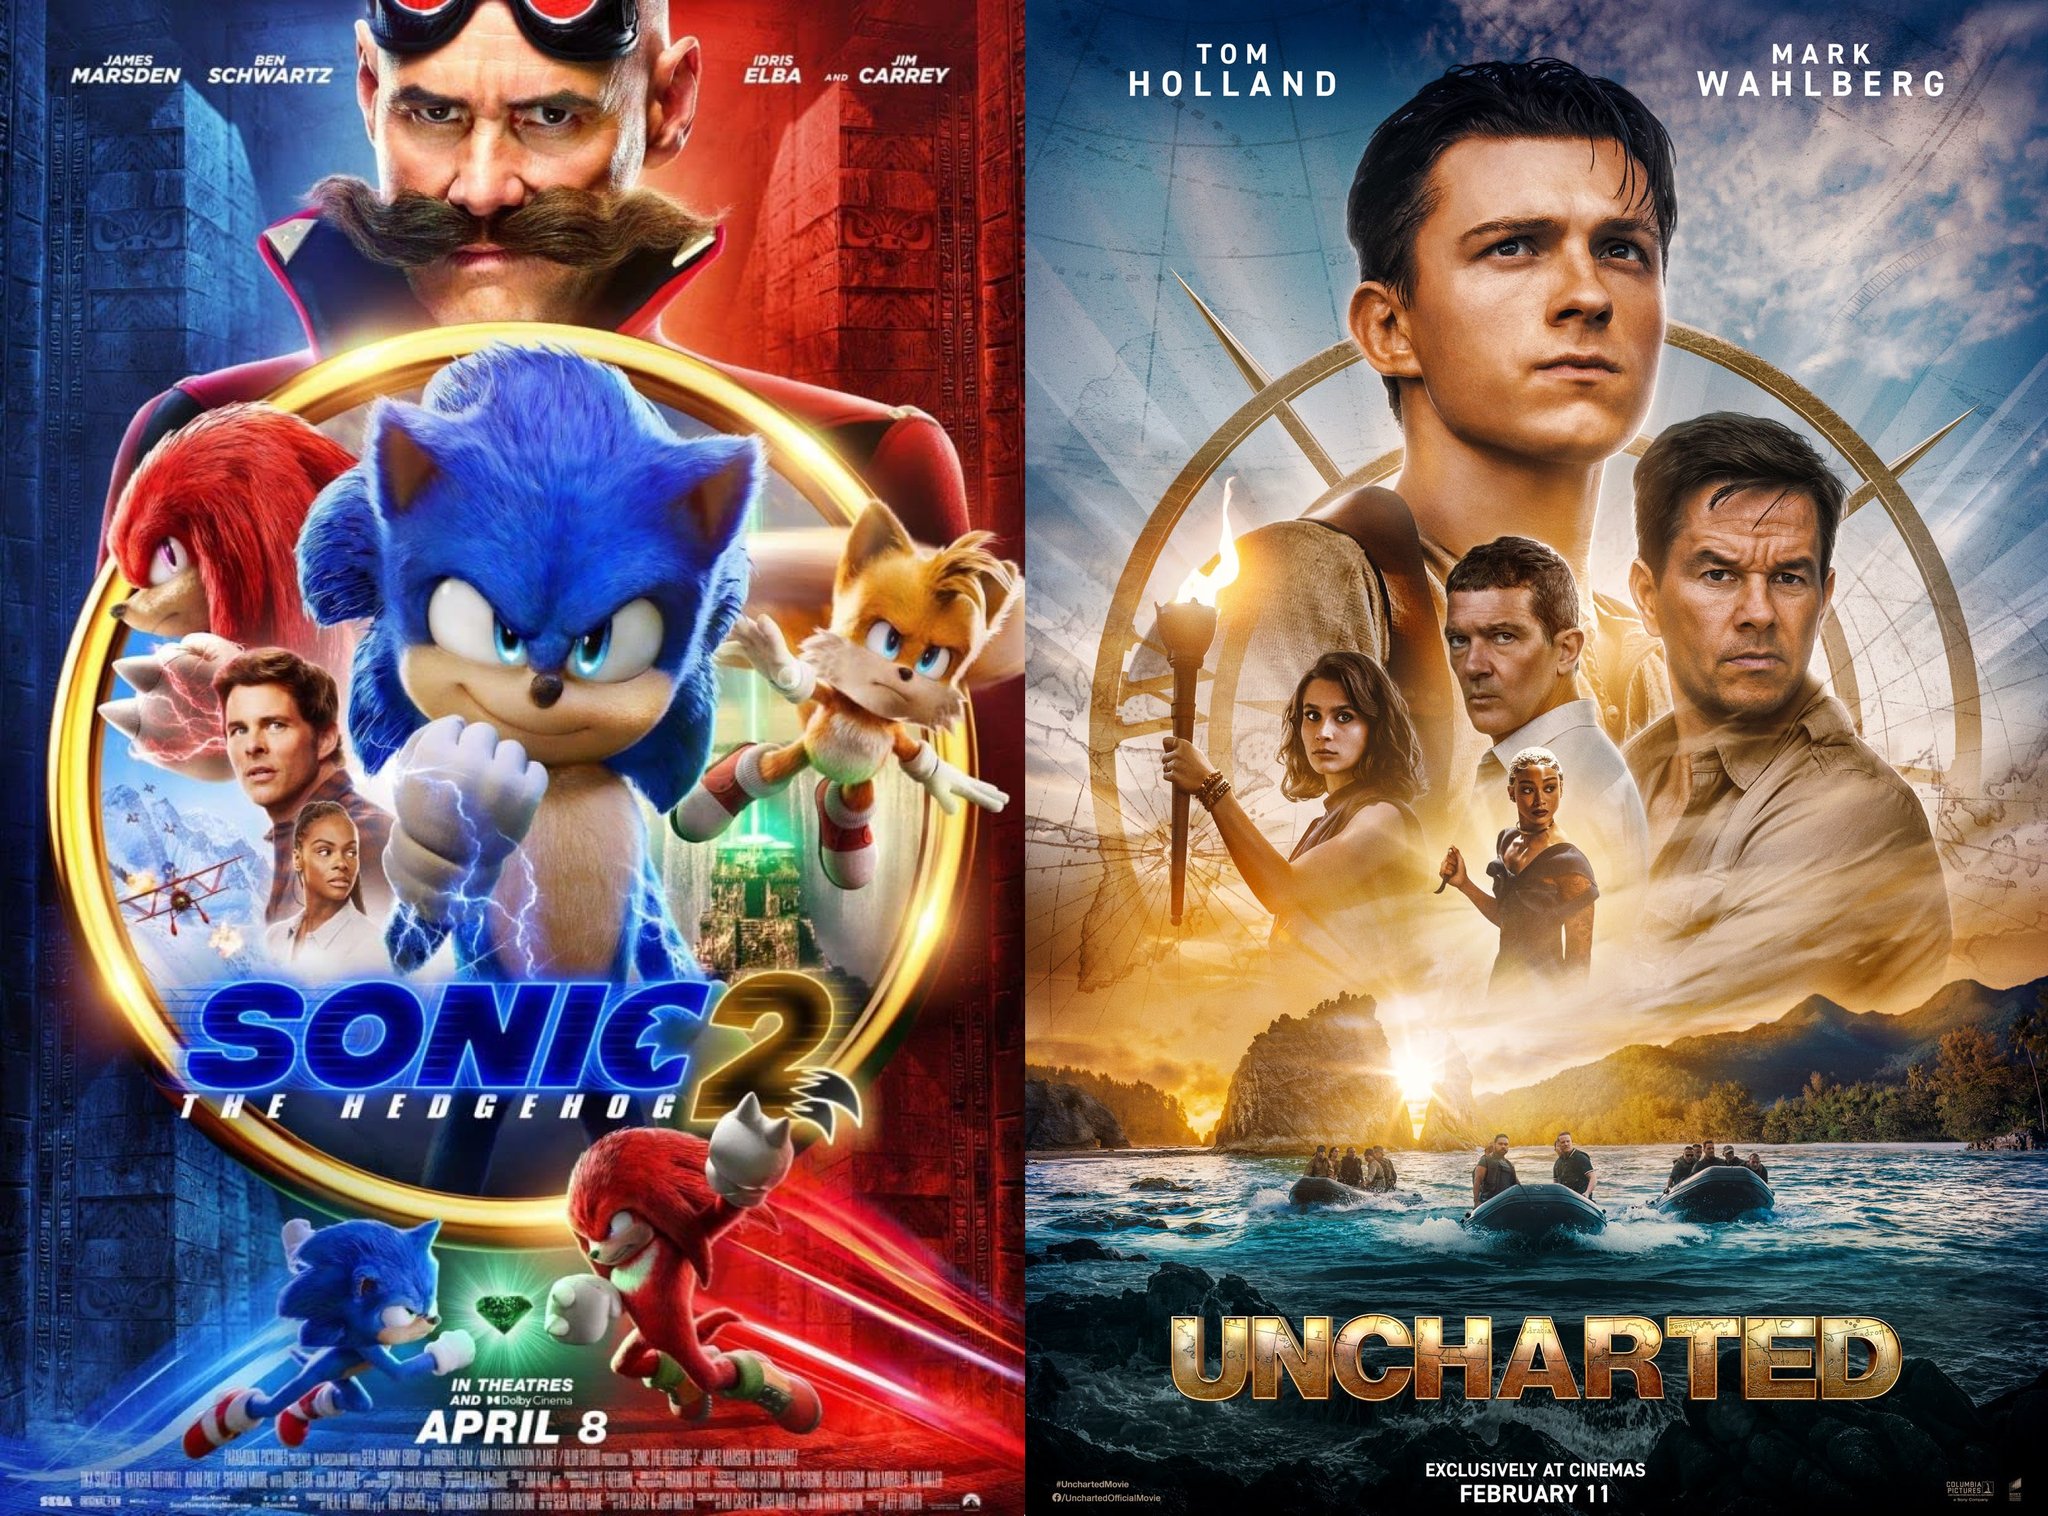 Benji-Sales on X: Video Game Movie Box Office Updates Sonic The Hedgehog 2  • Domestic - $145.8m • International - $142m • Global - $287.8m Uncharted •  Domestic - $145.9m • International 